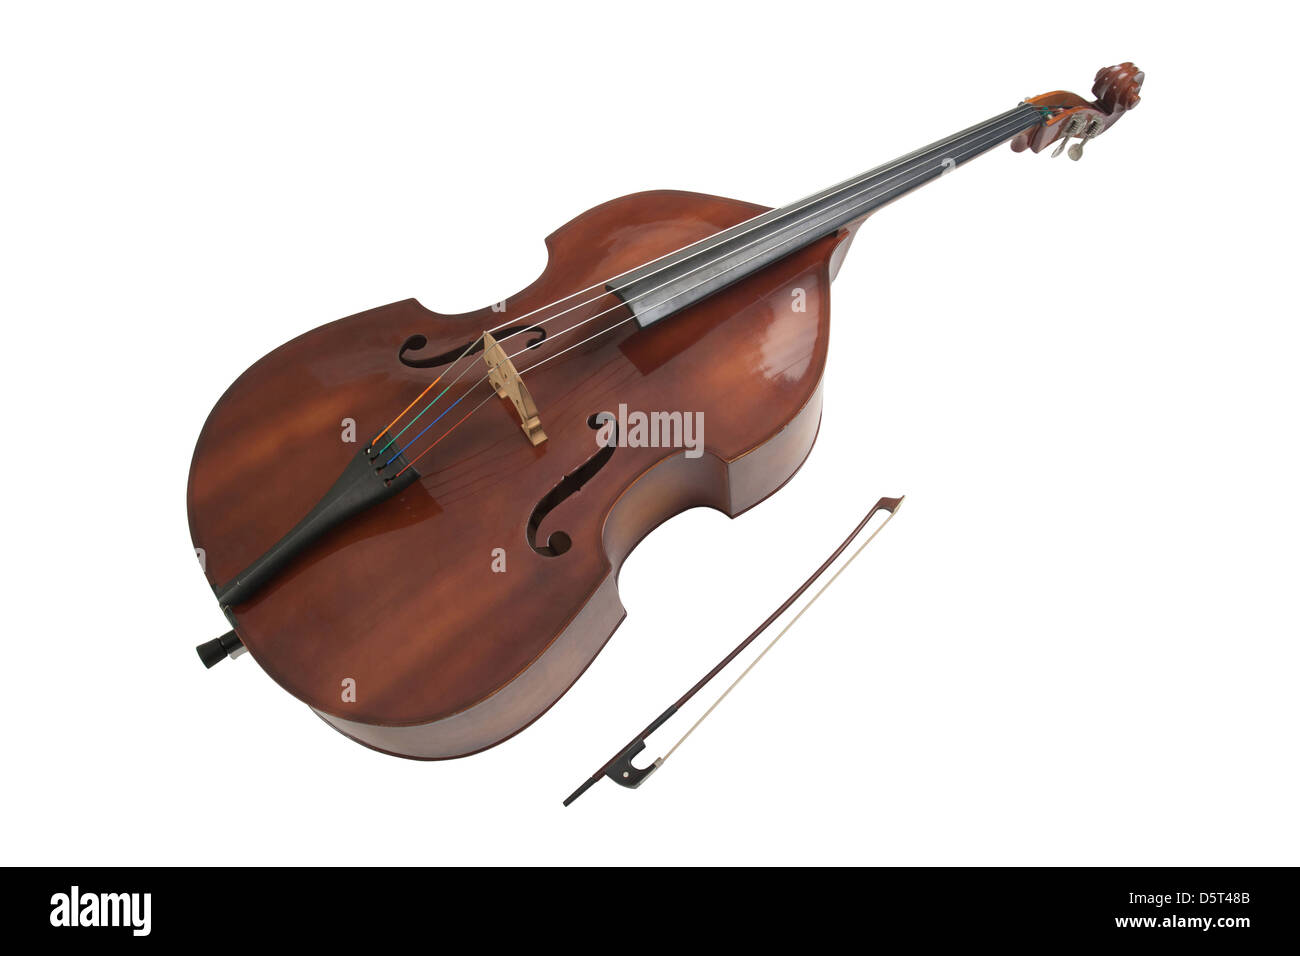 Double bass or string bass, upright bass, stand up bass or contra bass Stock Photo